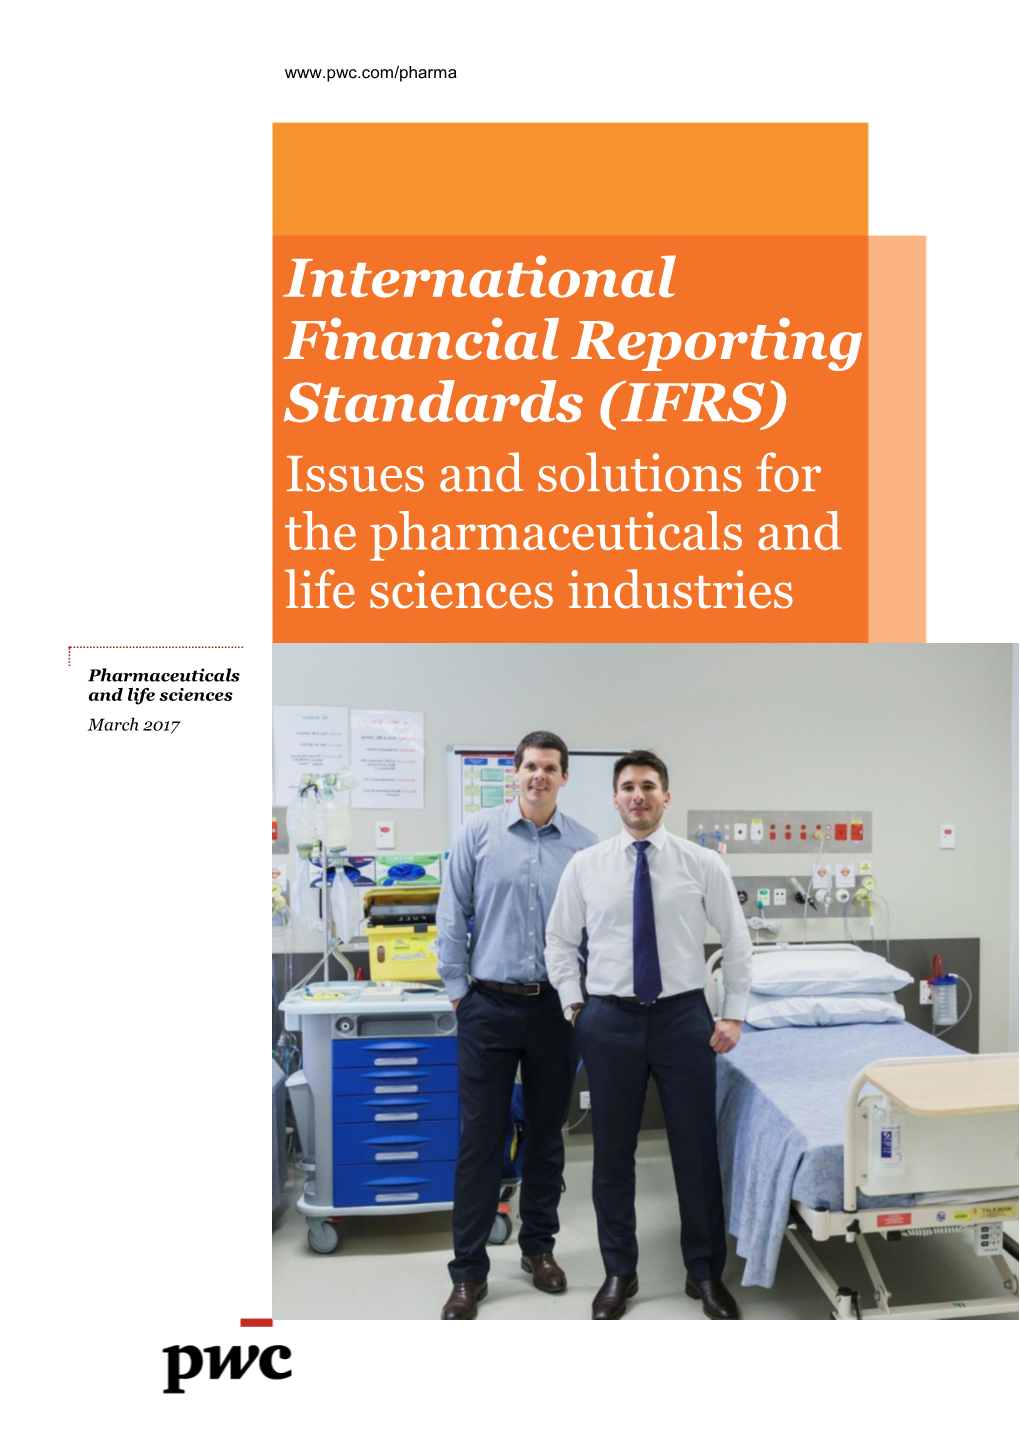 IFRS Issues and Solutions for the Pharmaceuticals and Life Sciences